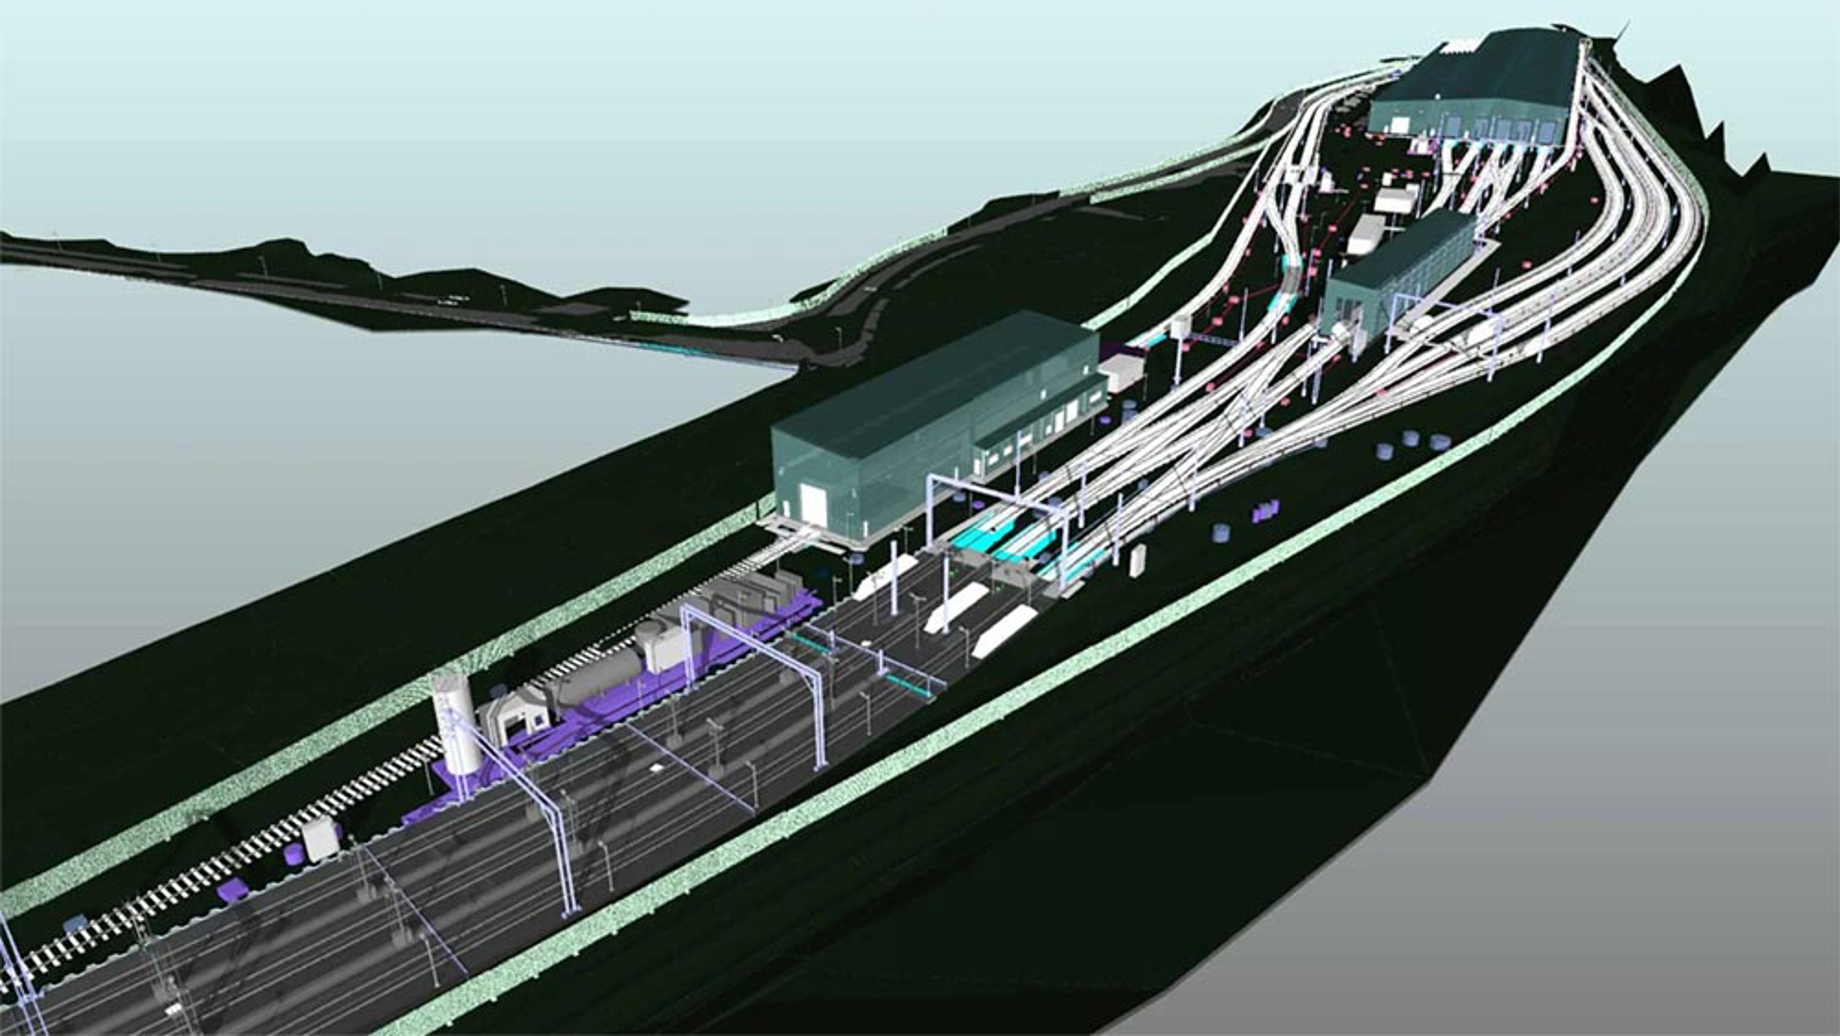 BIM model of a railway and infrastructure